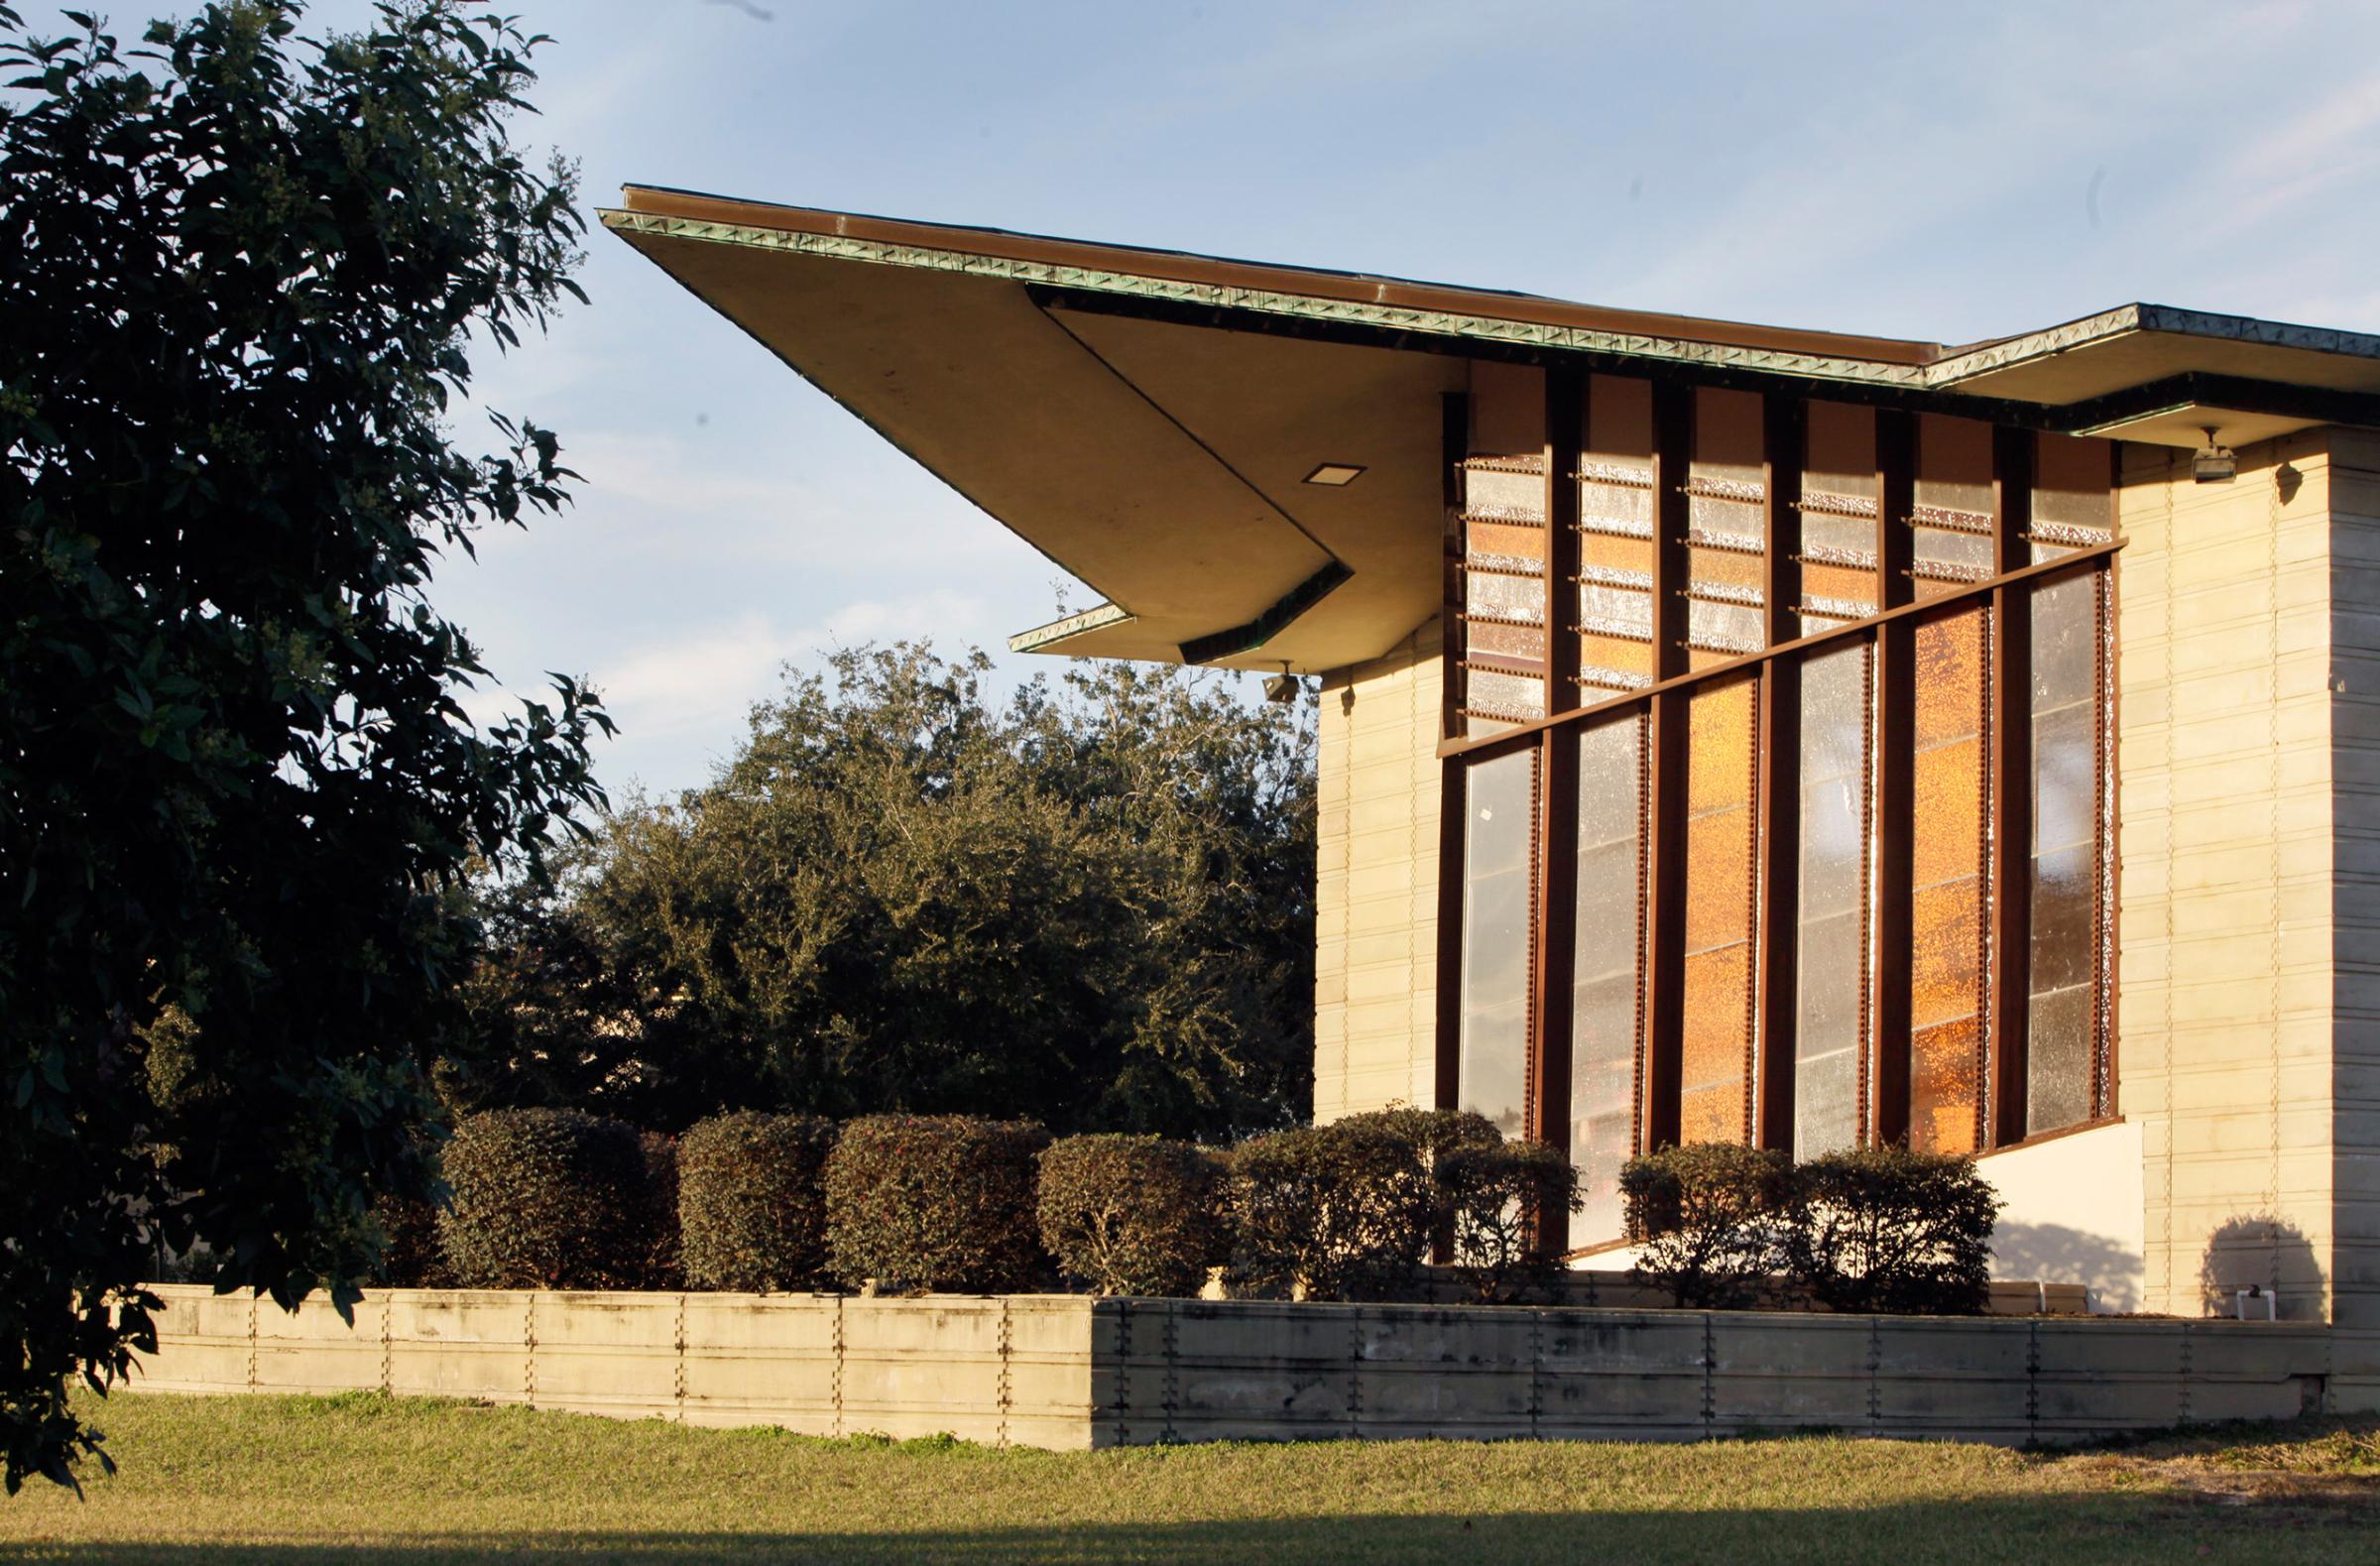 Frank Lloyd Wright's William H. Danforth Chapel at The Florida Southern College in Lakeland, FLA. Built circa 1938.